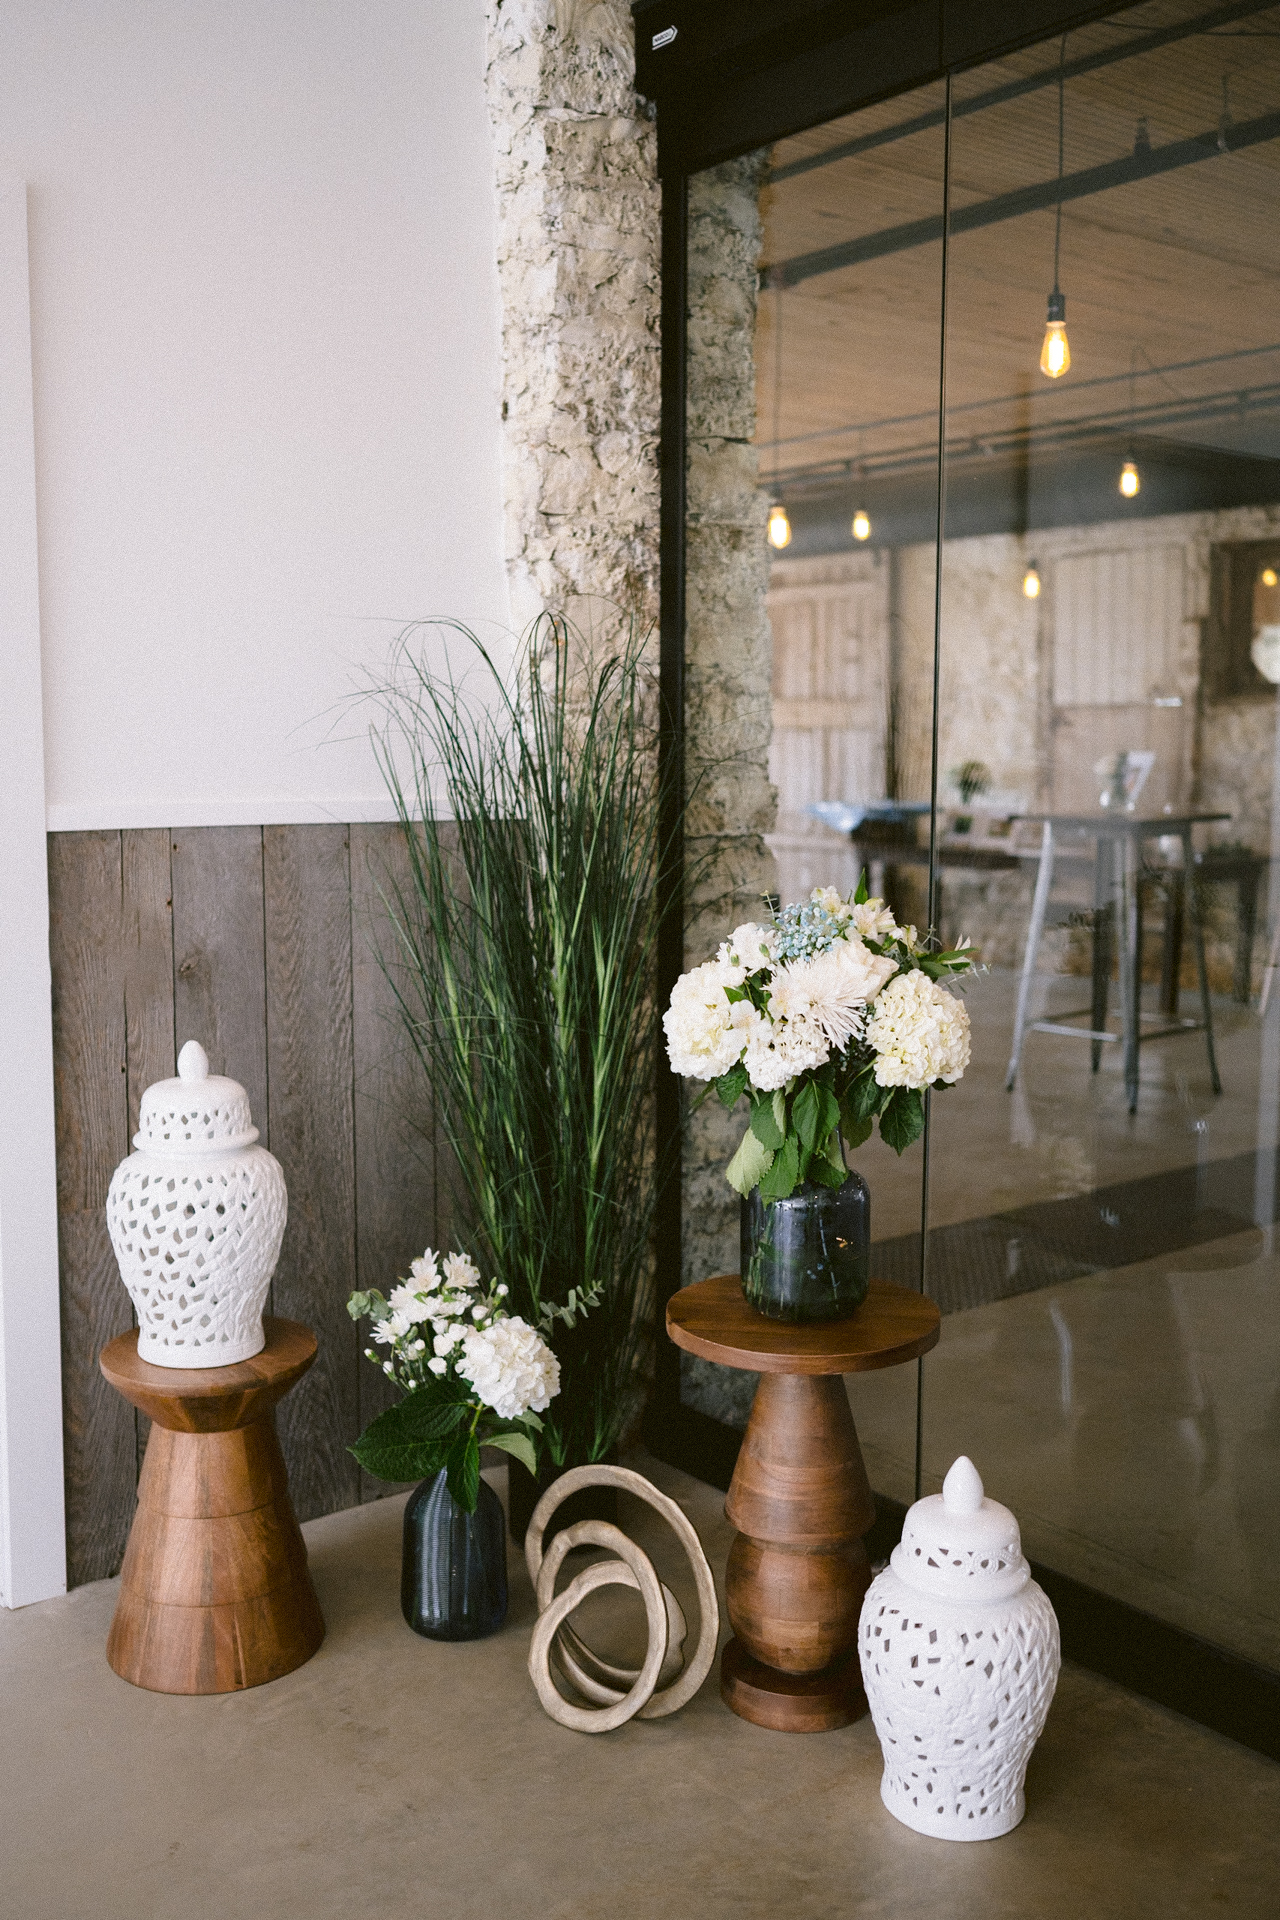 A set of beautiful decoration displayed at the corner of The Byre, Cambium Farms.